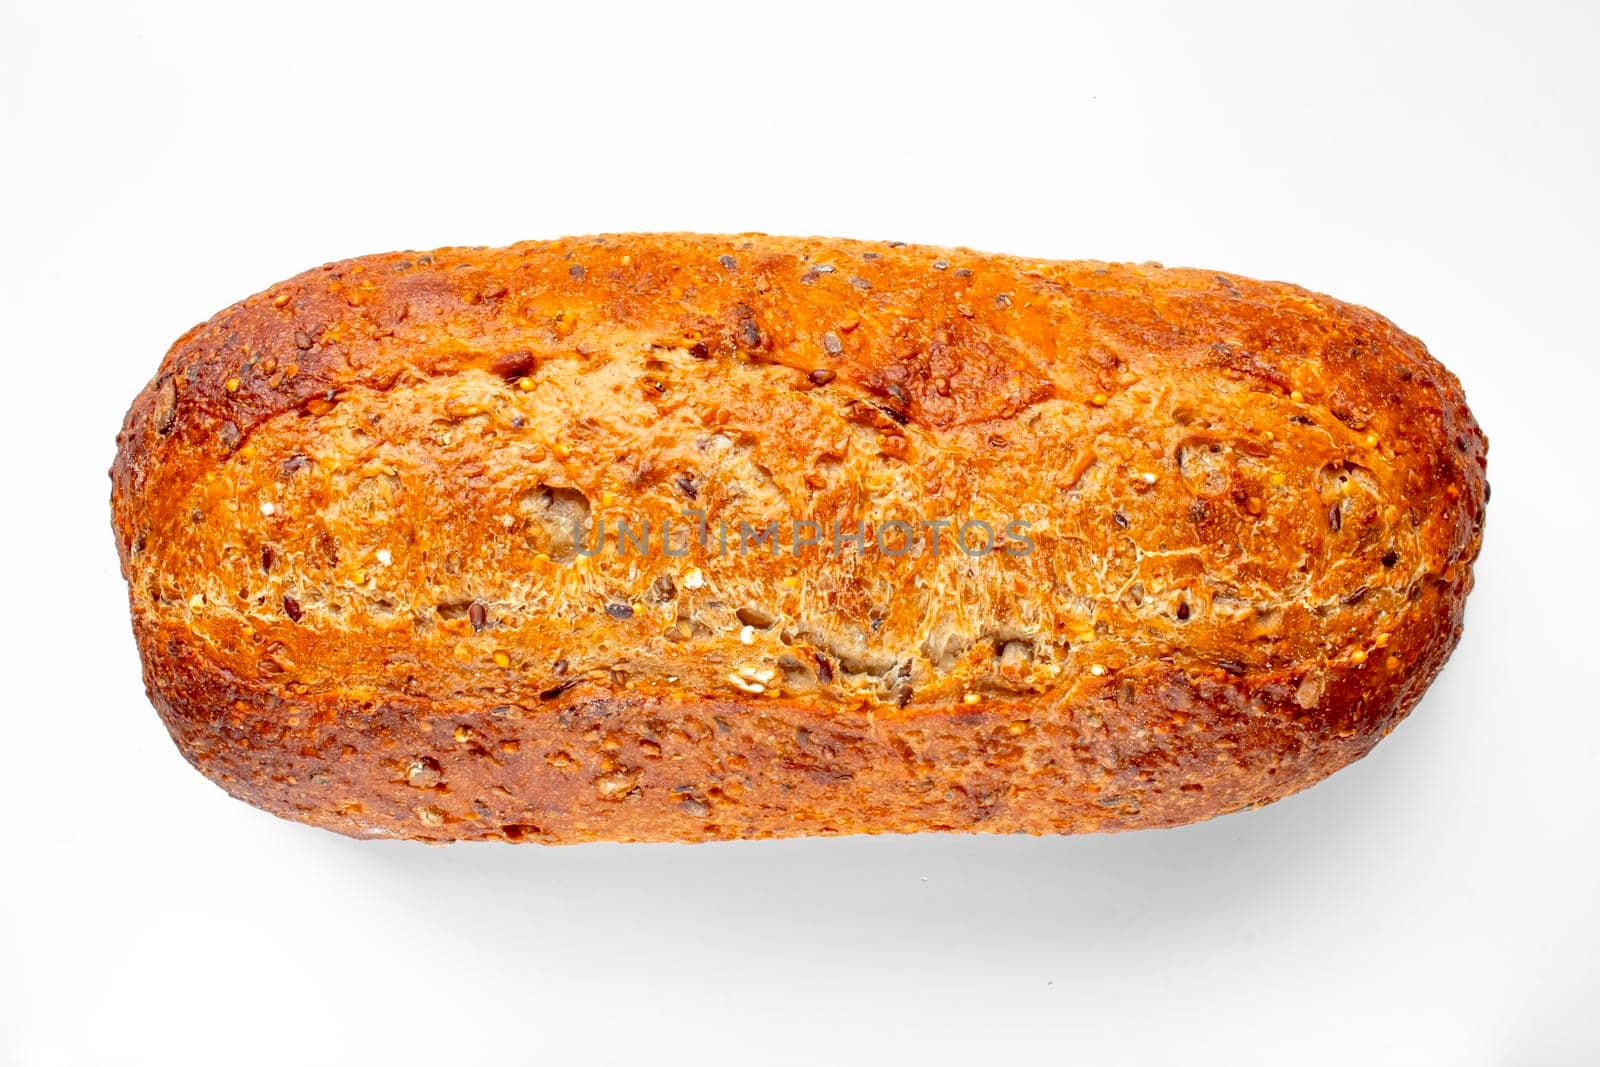 Top view of a Bakery Artisan Bread, Harvest Grain Oval on a white table. by oasisamuel